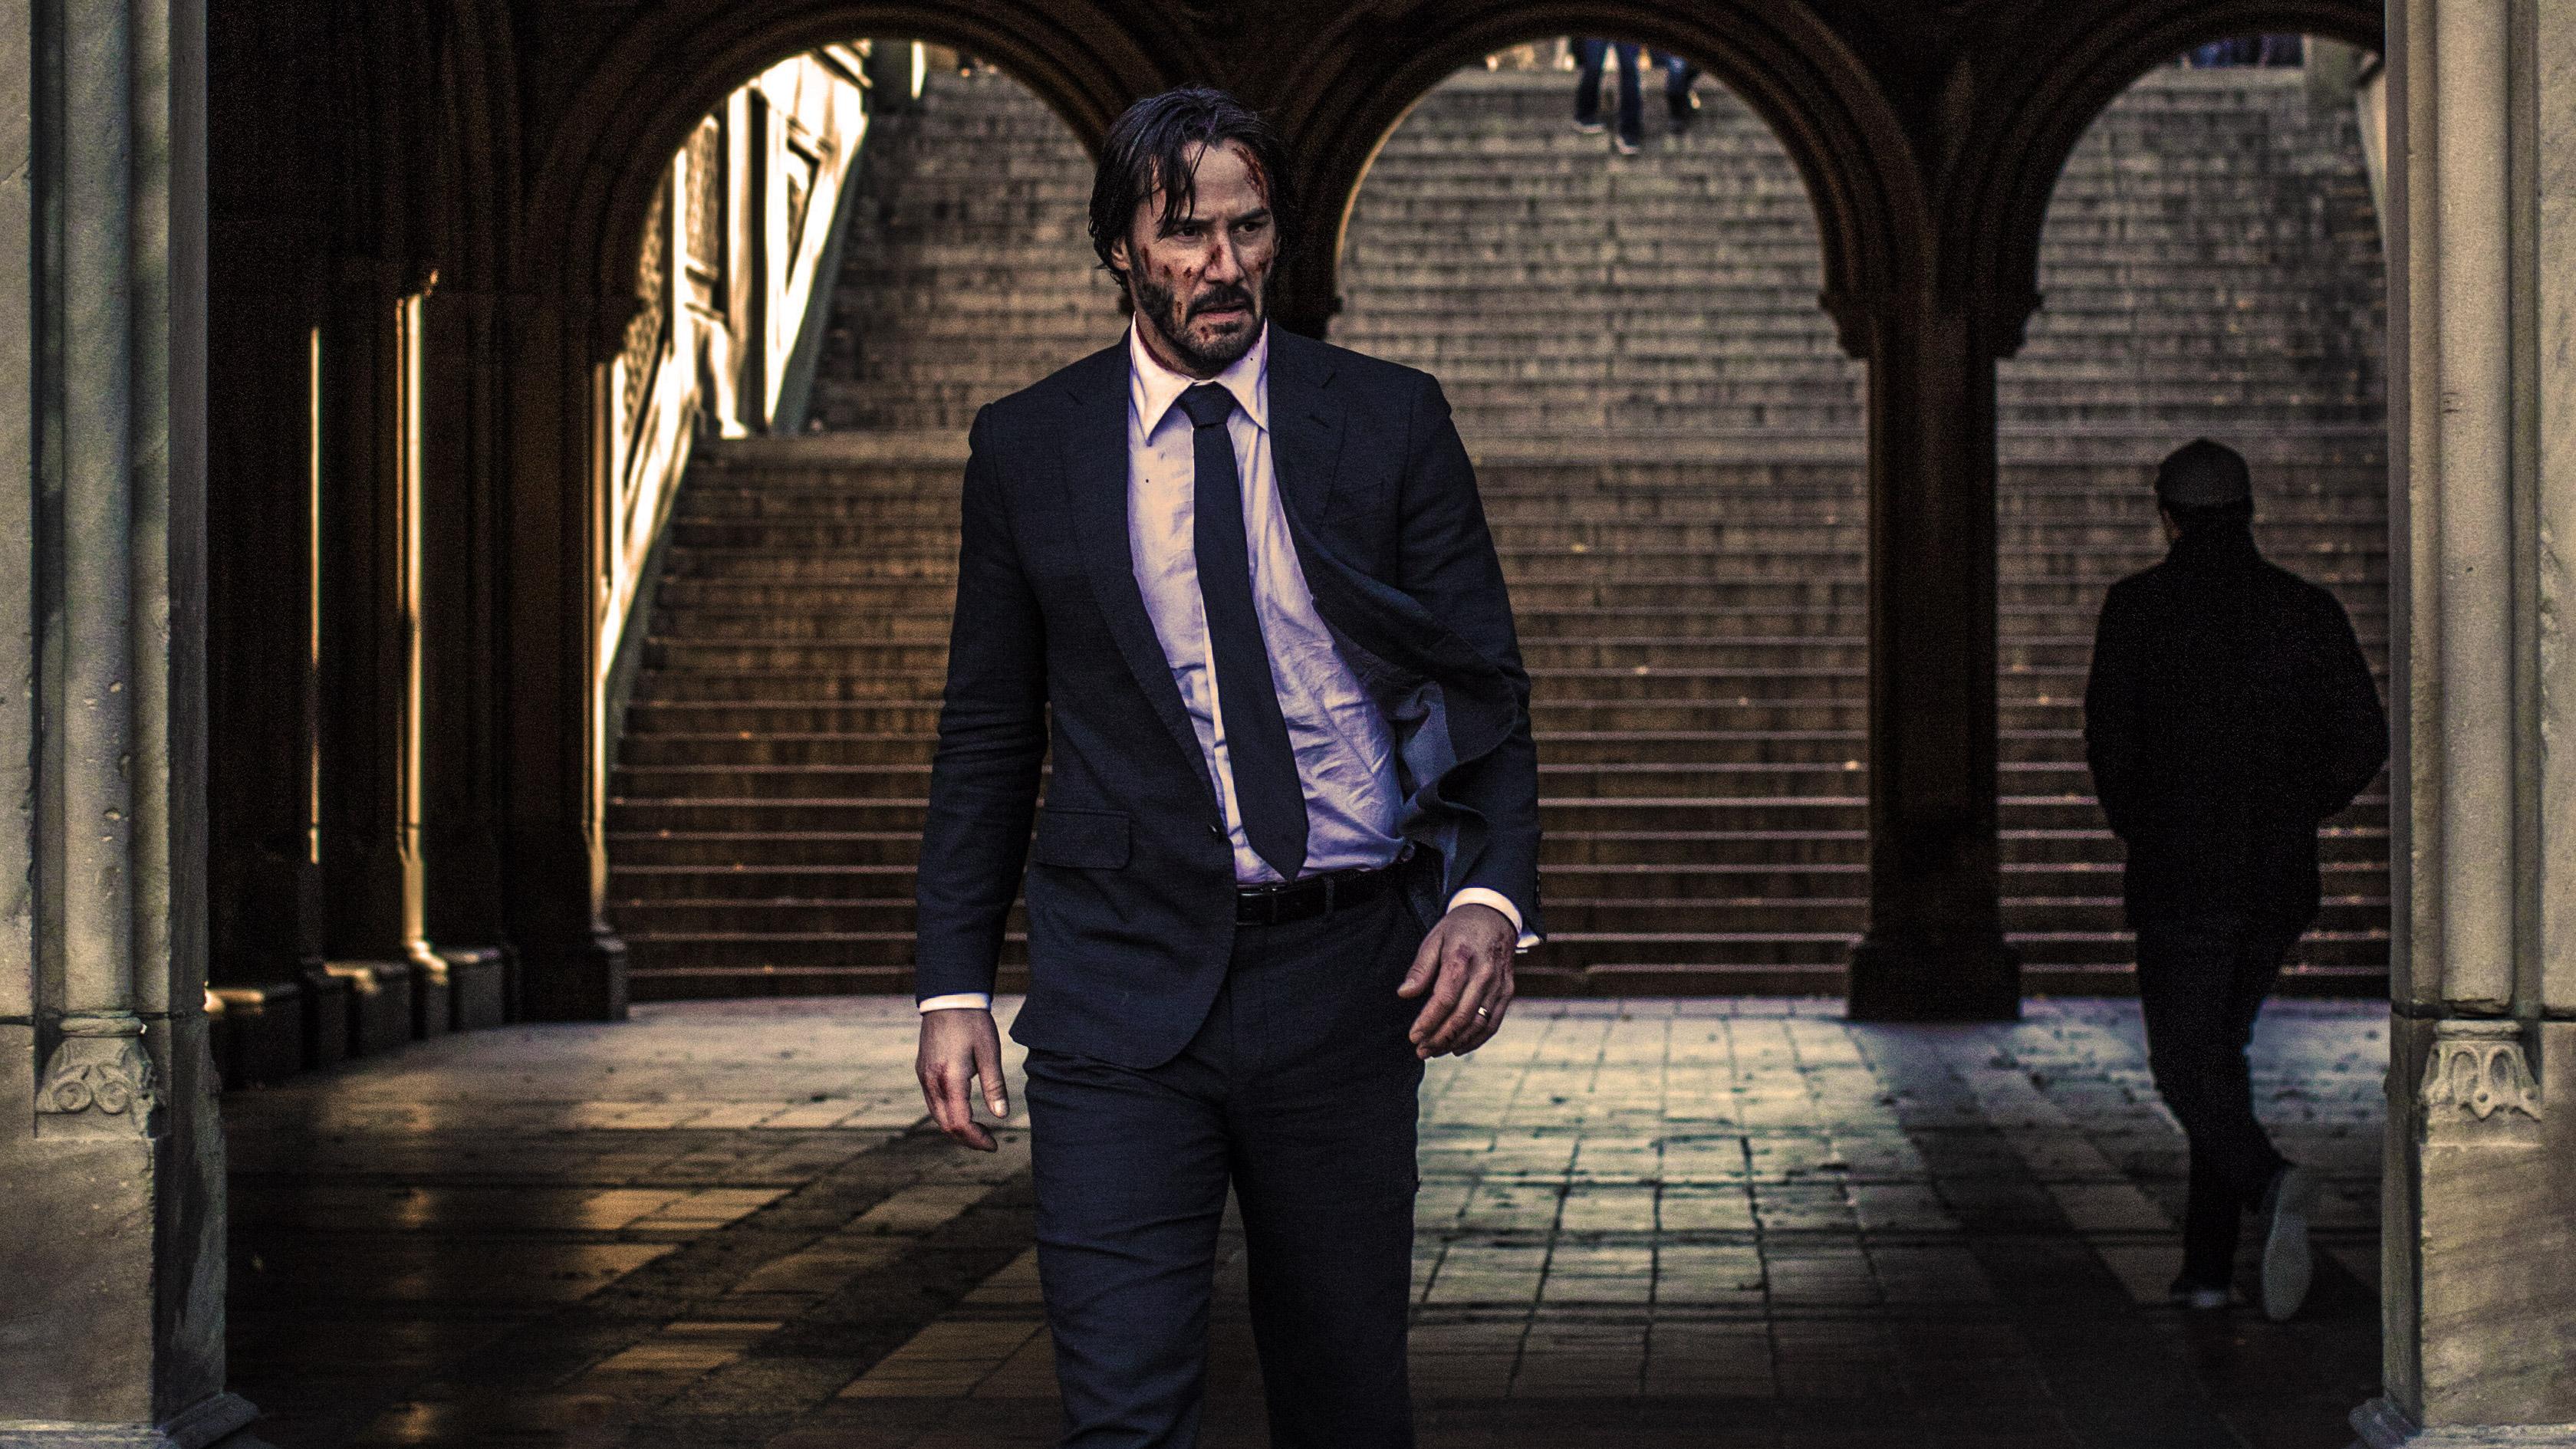 John Wick: Chapter 3' Officially Brings Back Director Chad Stahelski